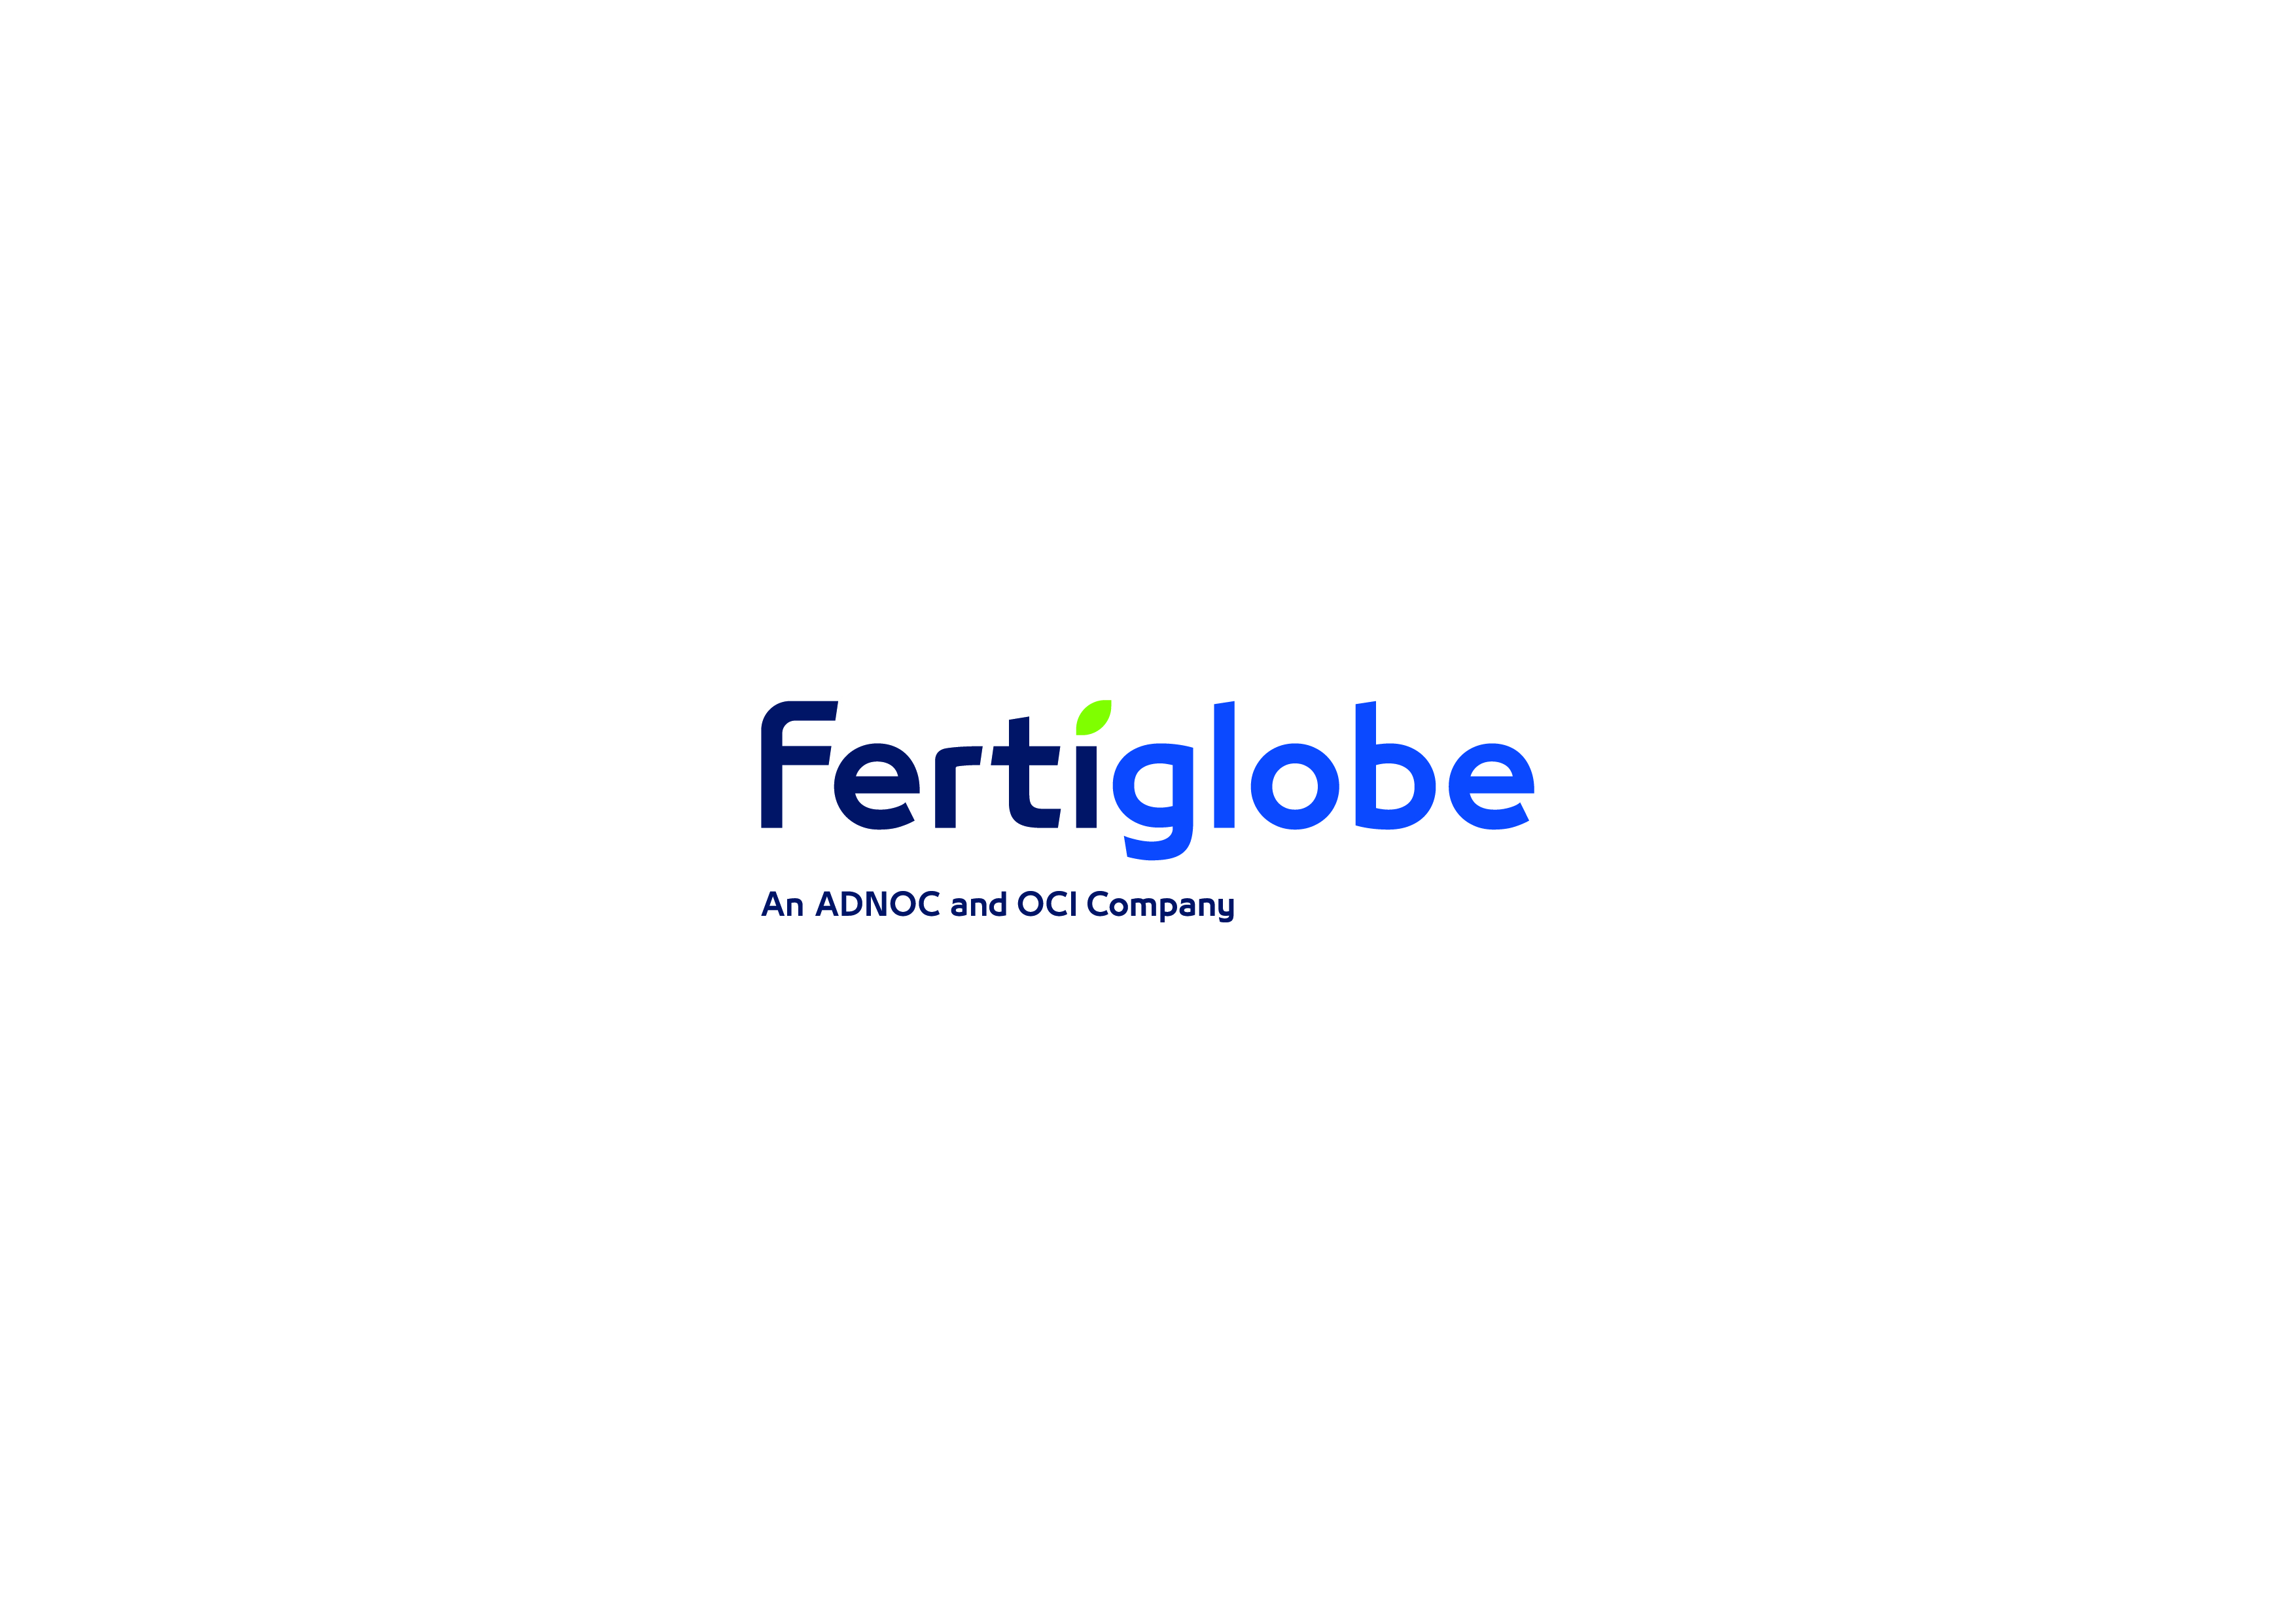 ADNOC And OCI’s ‘Fertiglobe’ Announces Offer Price Range, Opening Of Subscription Period For Its IPO On ADX